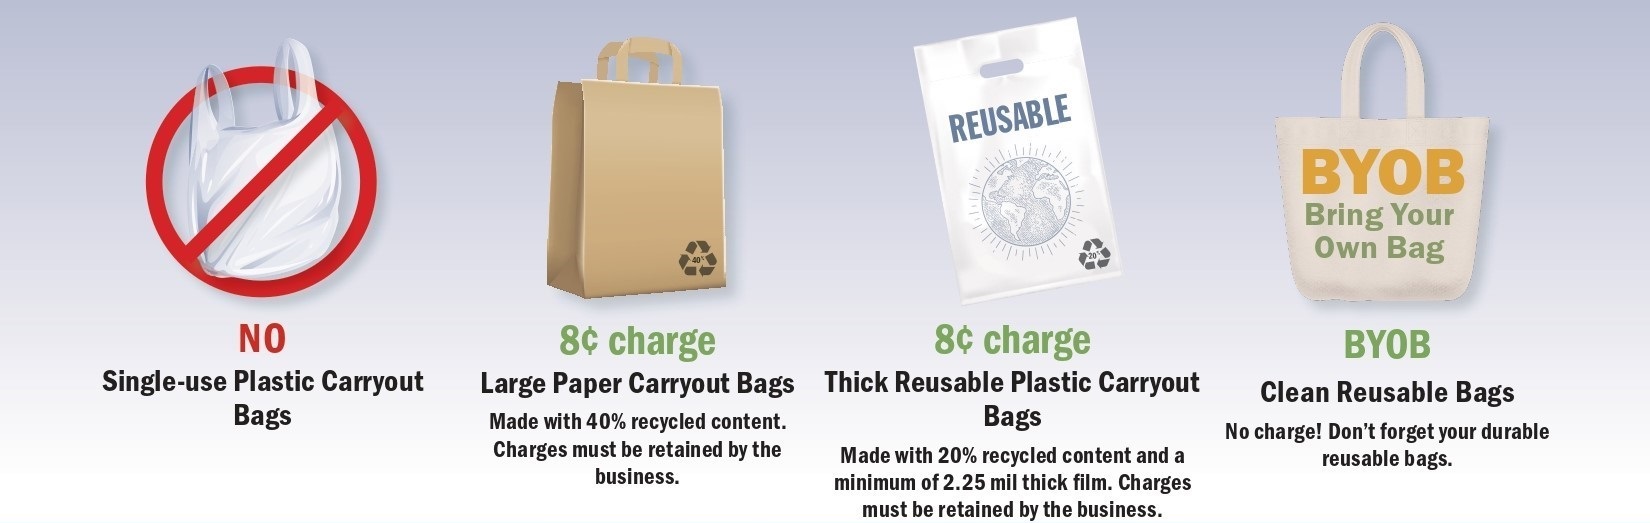 Shopping Bag Restrictions - City of Tacoma